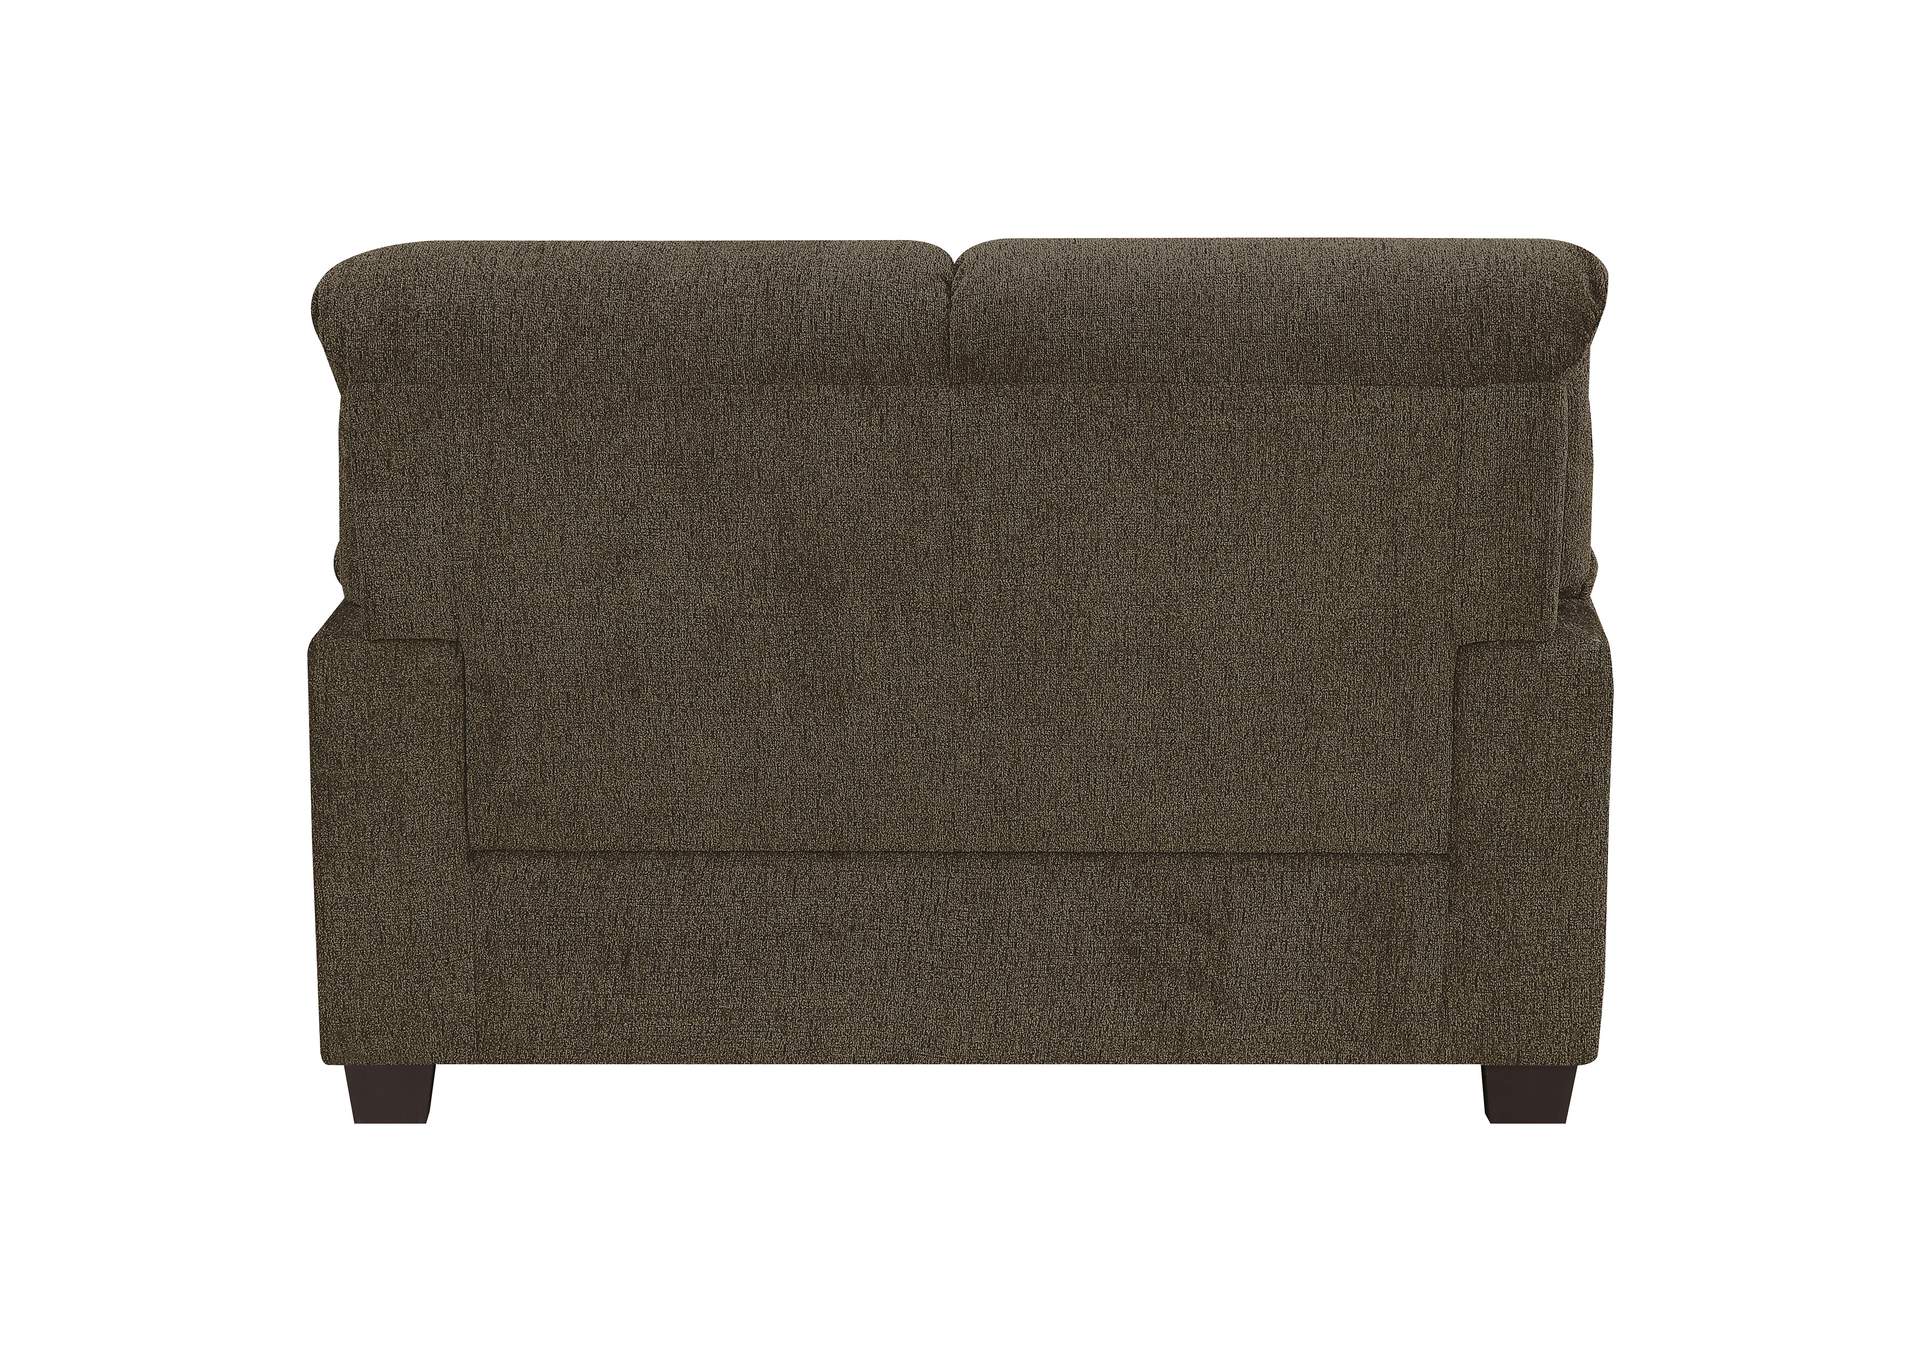 Clementine Upholstered Loveseat with Nailhead Trim Brown,Coaster Furniture